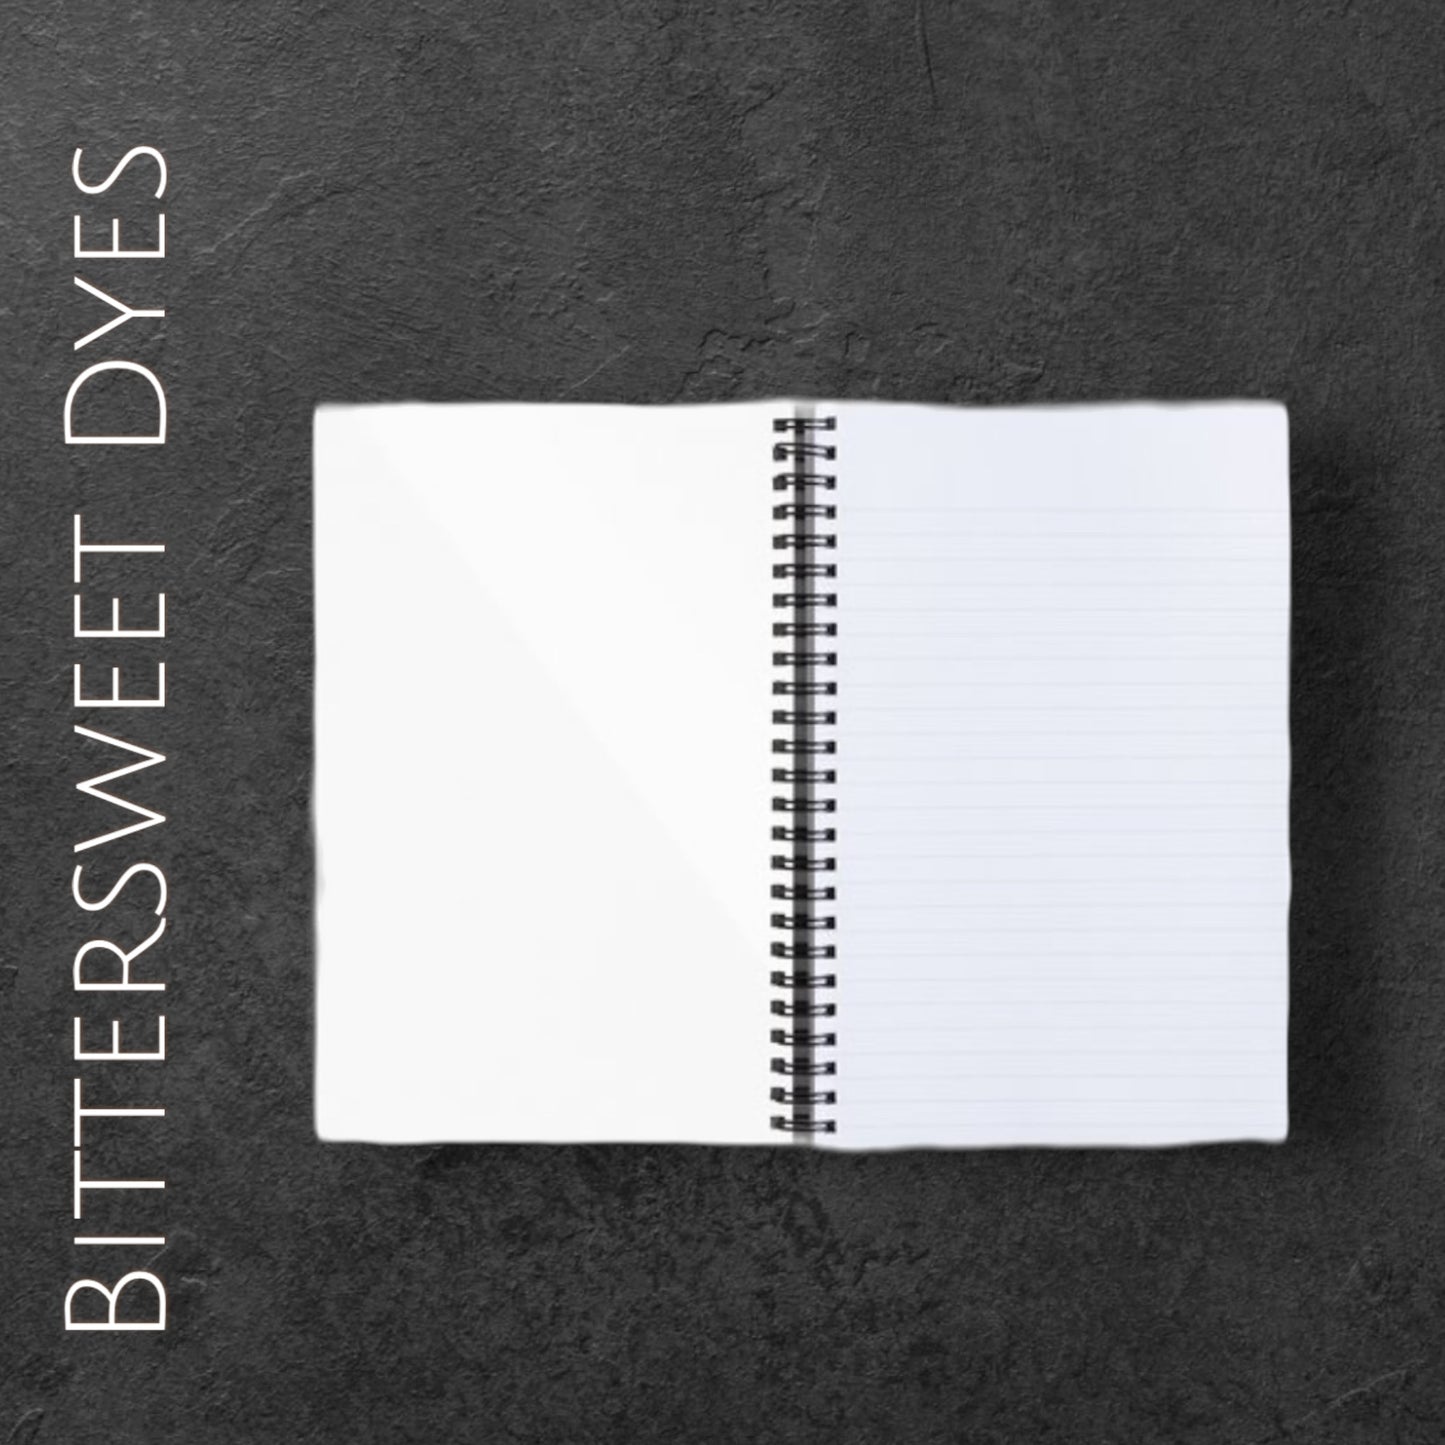 Limited Edition Bittersweet Dyes Notebook